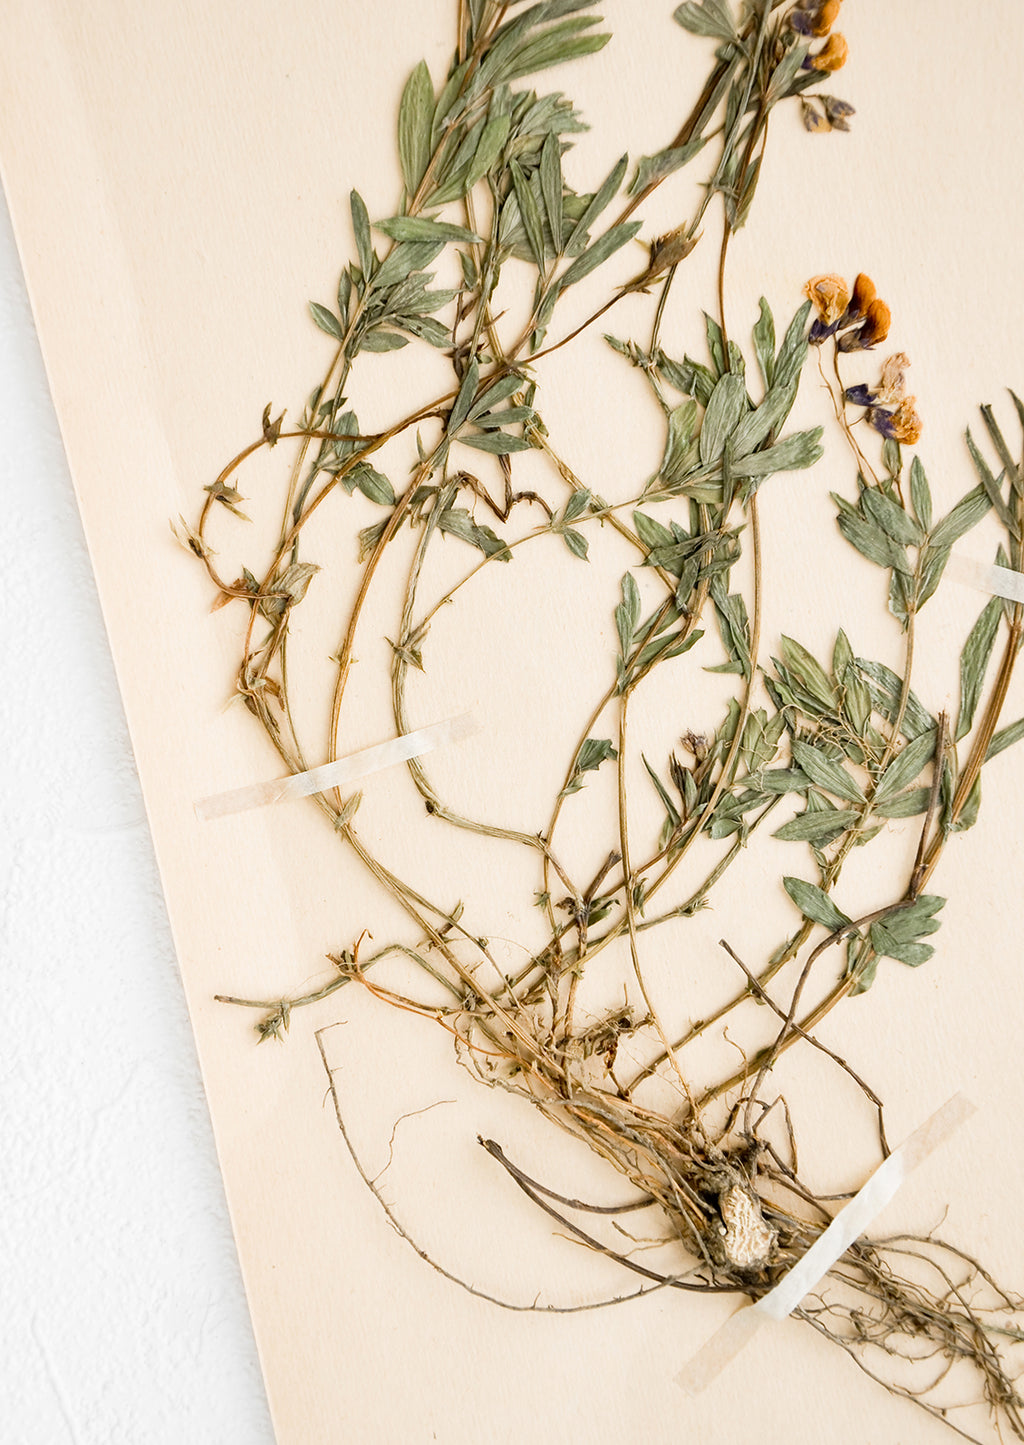 2: Dried tuberose floral specimen taped to paper